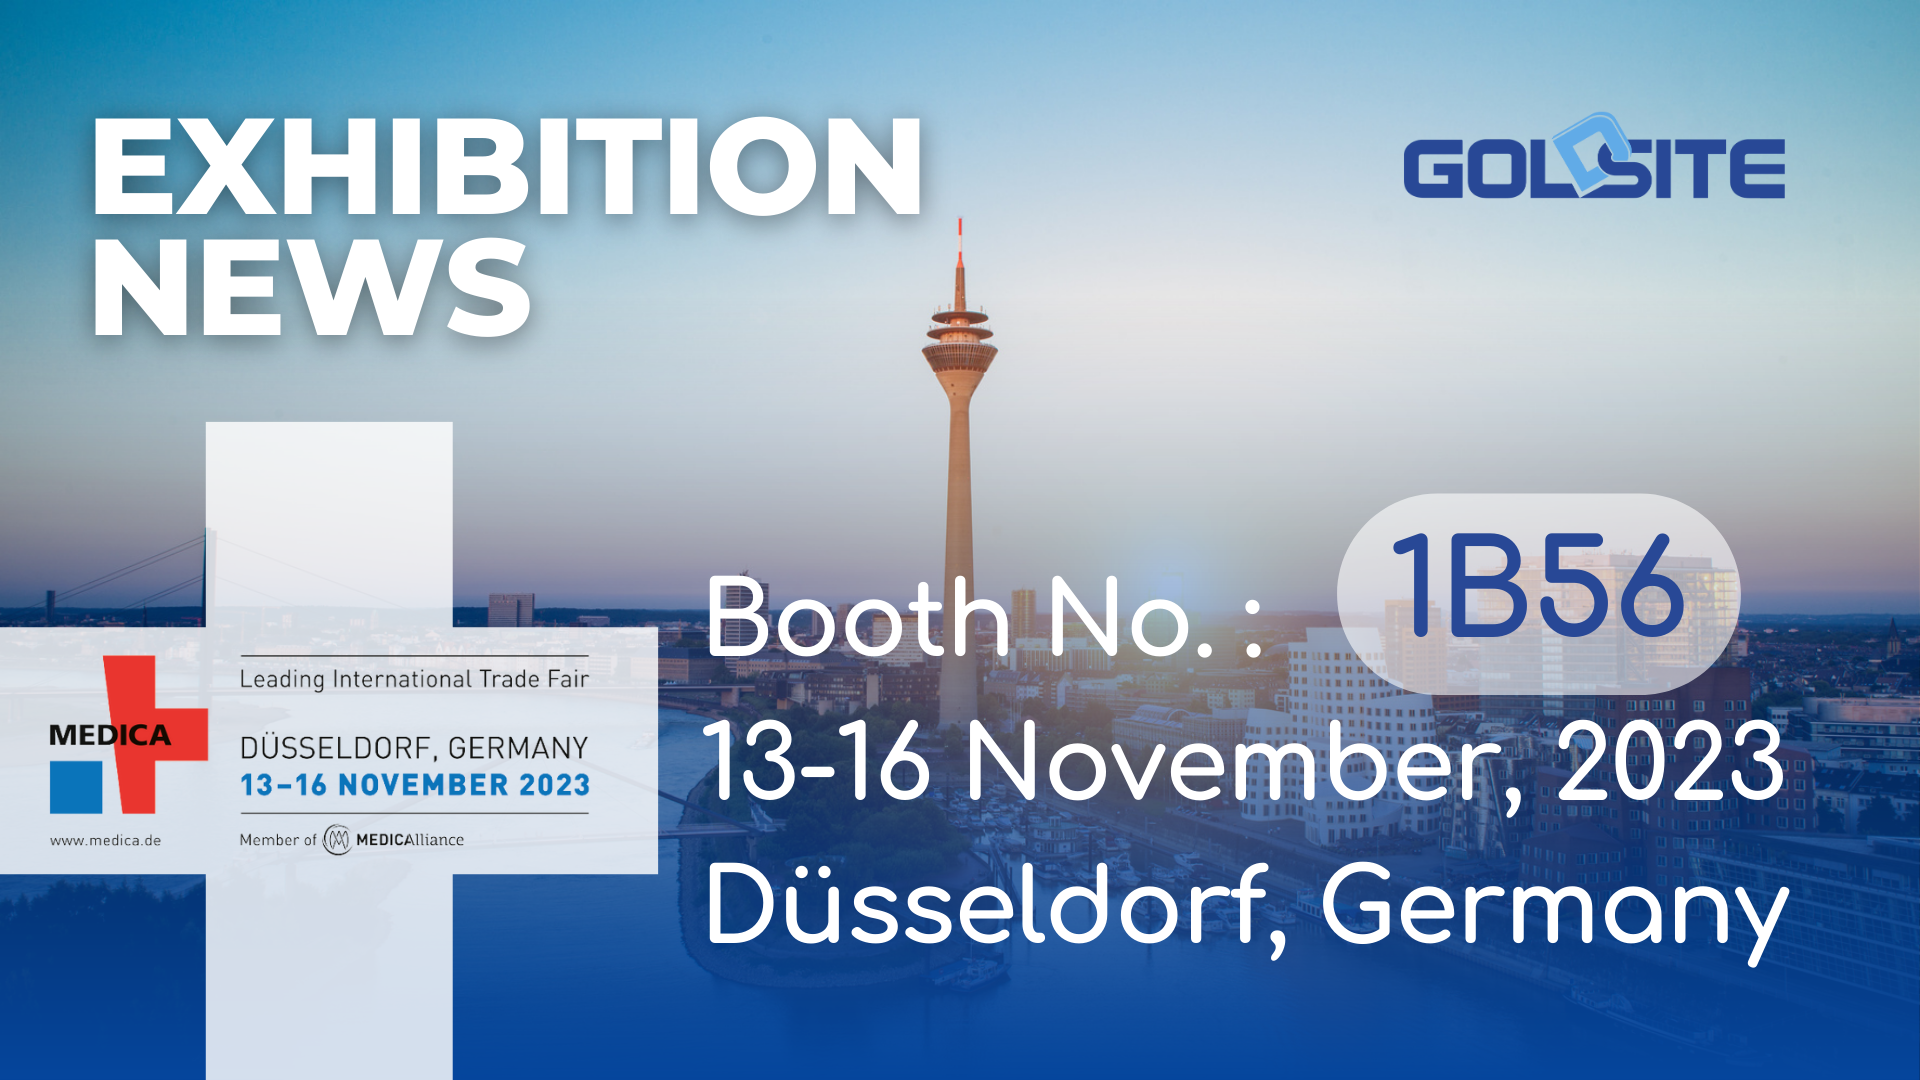 Upcoming Events: Goldsite to exhibit at MEDICA 2023 in Germany